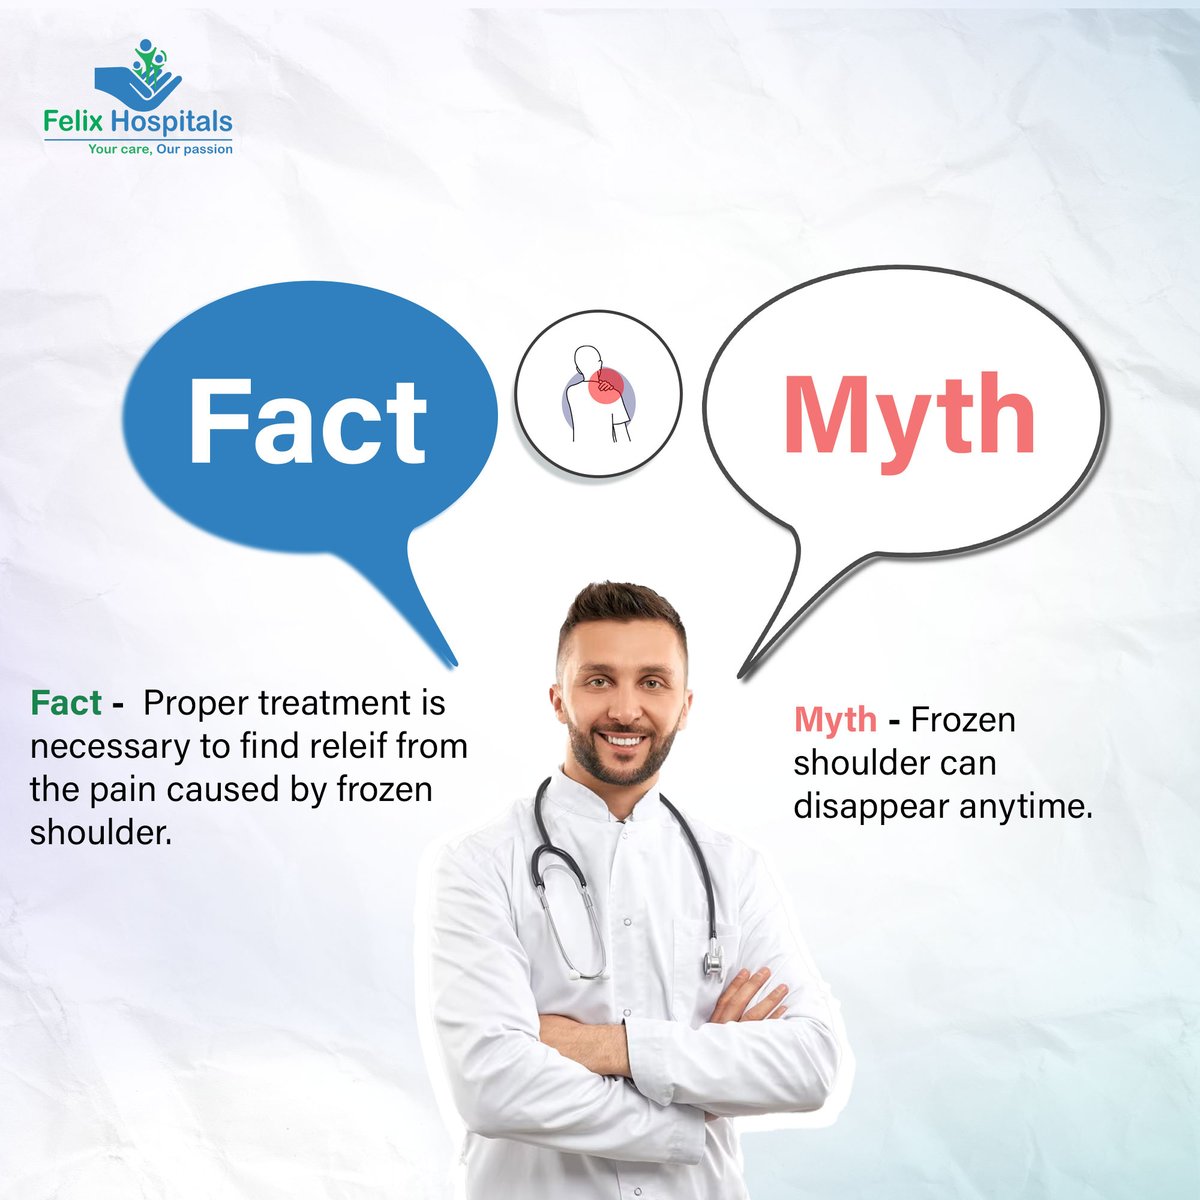 Physiotherapists treat frozen shoulder with exercises and therapy to reduce pain and restore movement. Early treatment speeds up recovery. Trust your physiotherapist to help you move freely again. #excercise #therapist #PainRelief #myth #mythandfact #medicine #facts